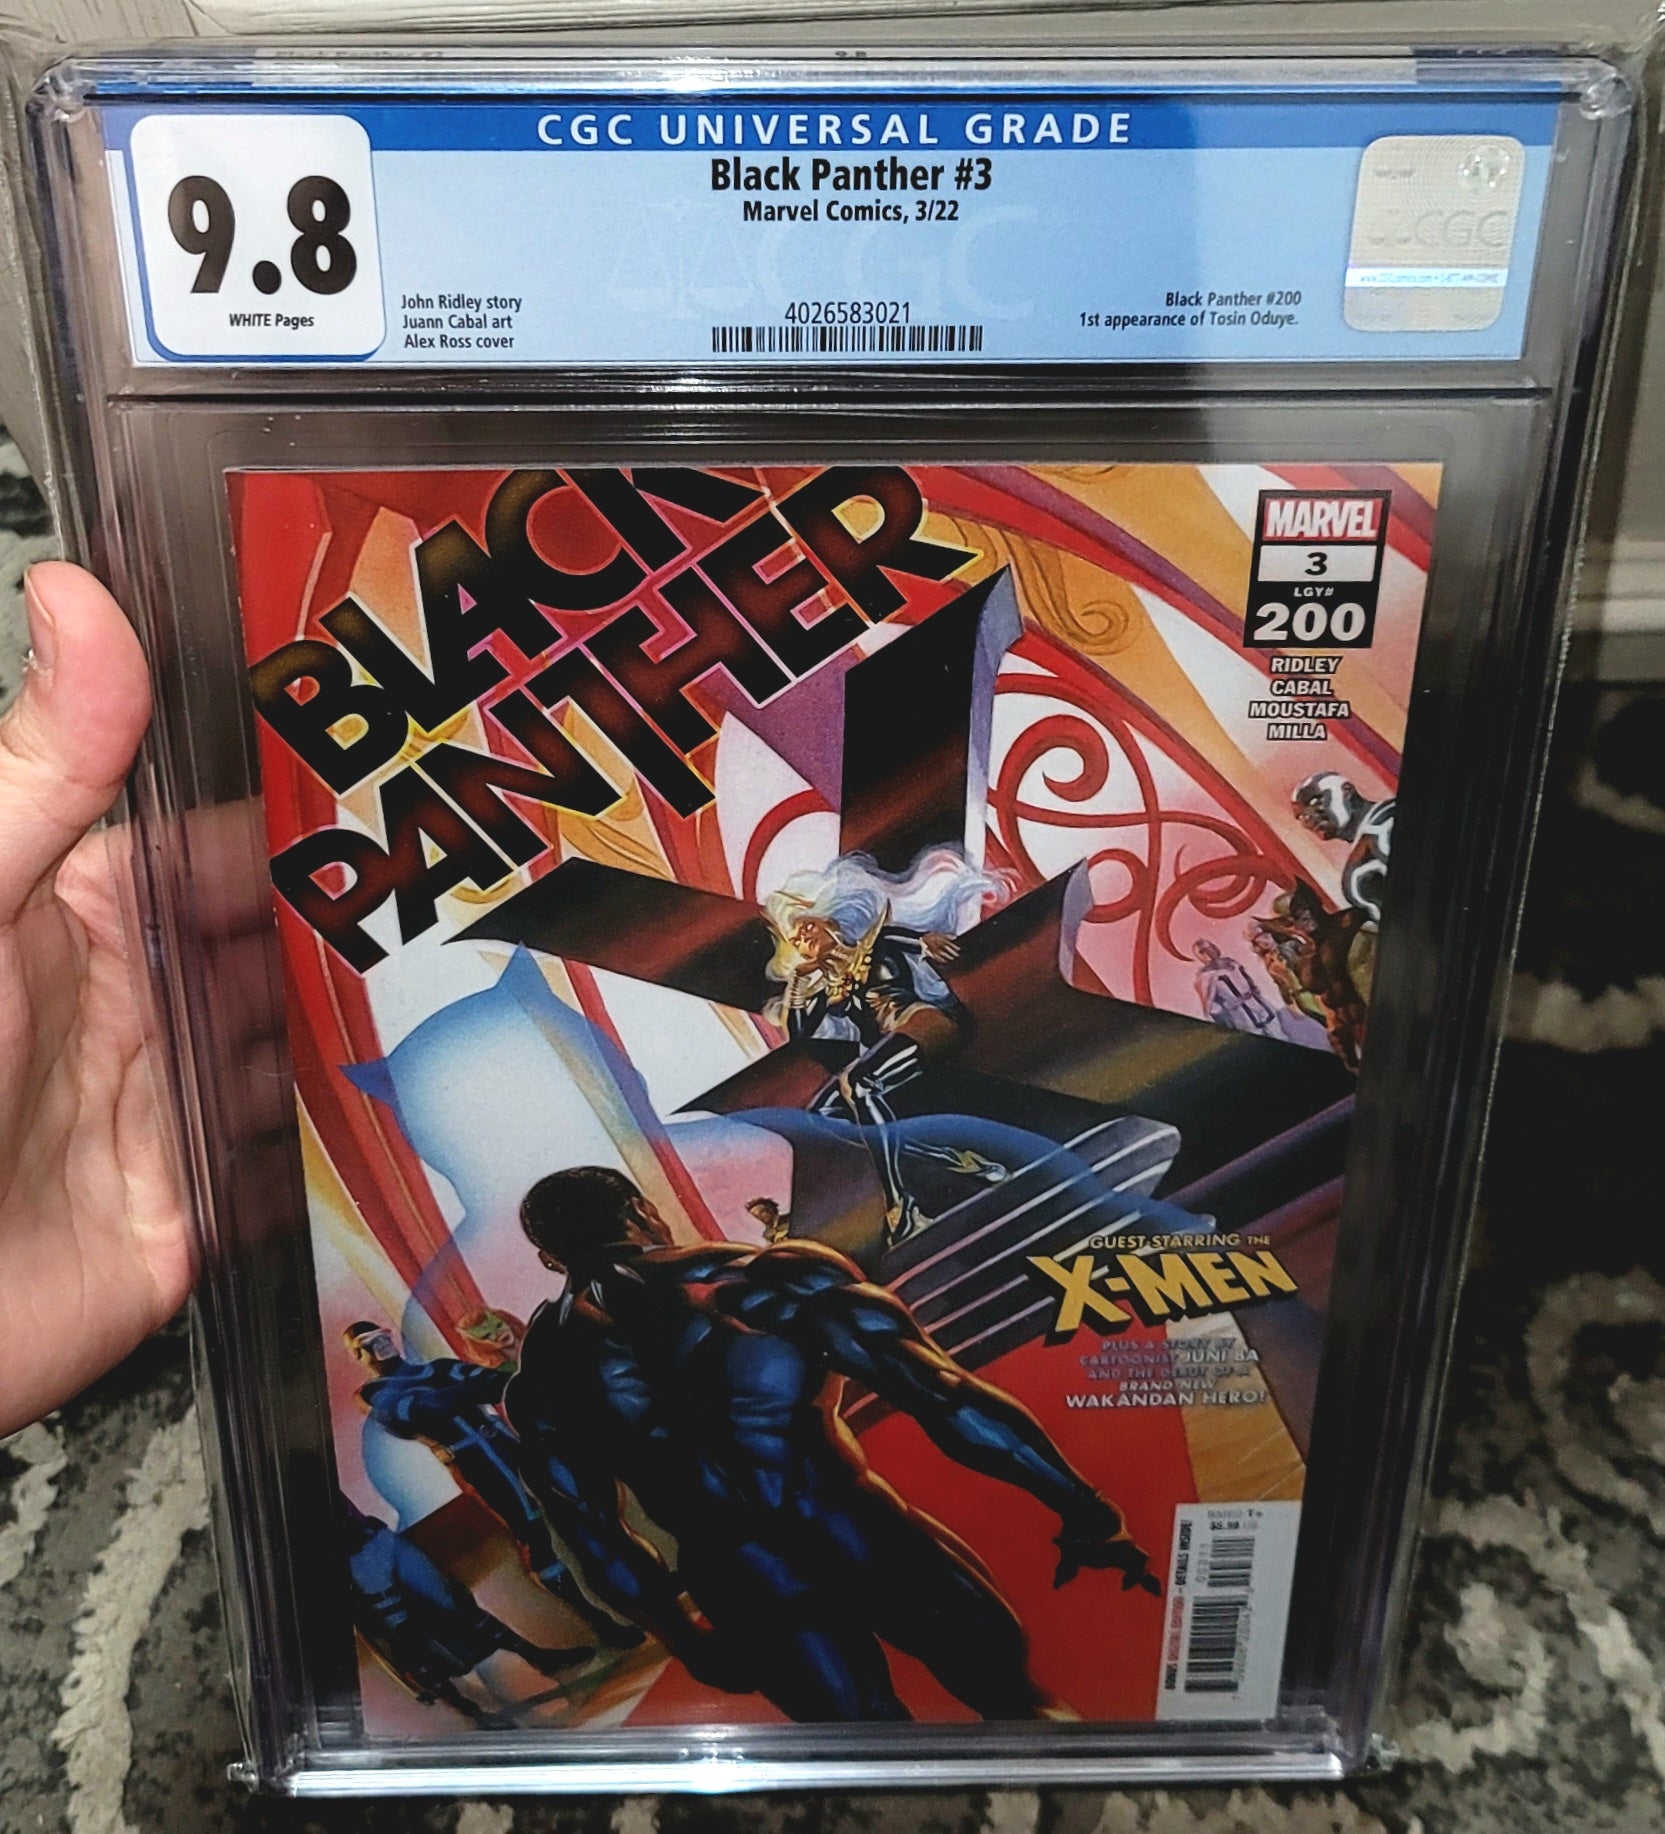 Black Panther #3A Alex Ross CGC 9.8 1st App Tosin Oduye Stronghold  Collectibles Comic